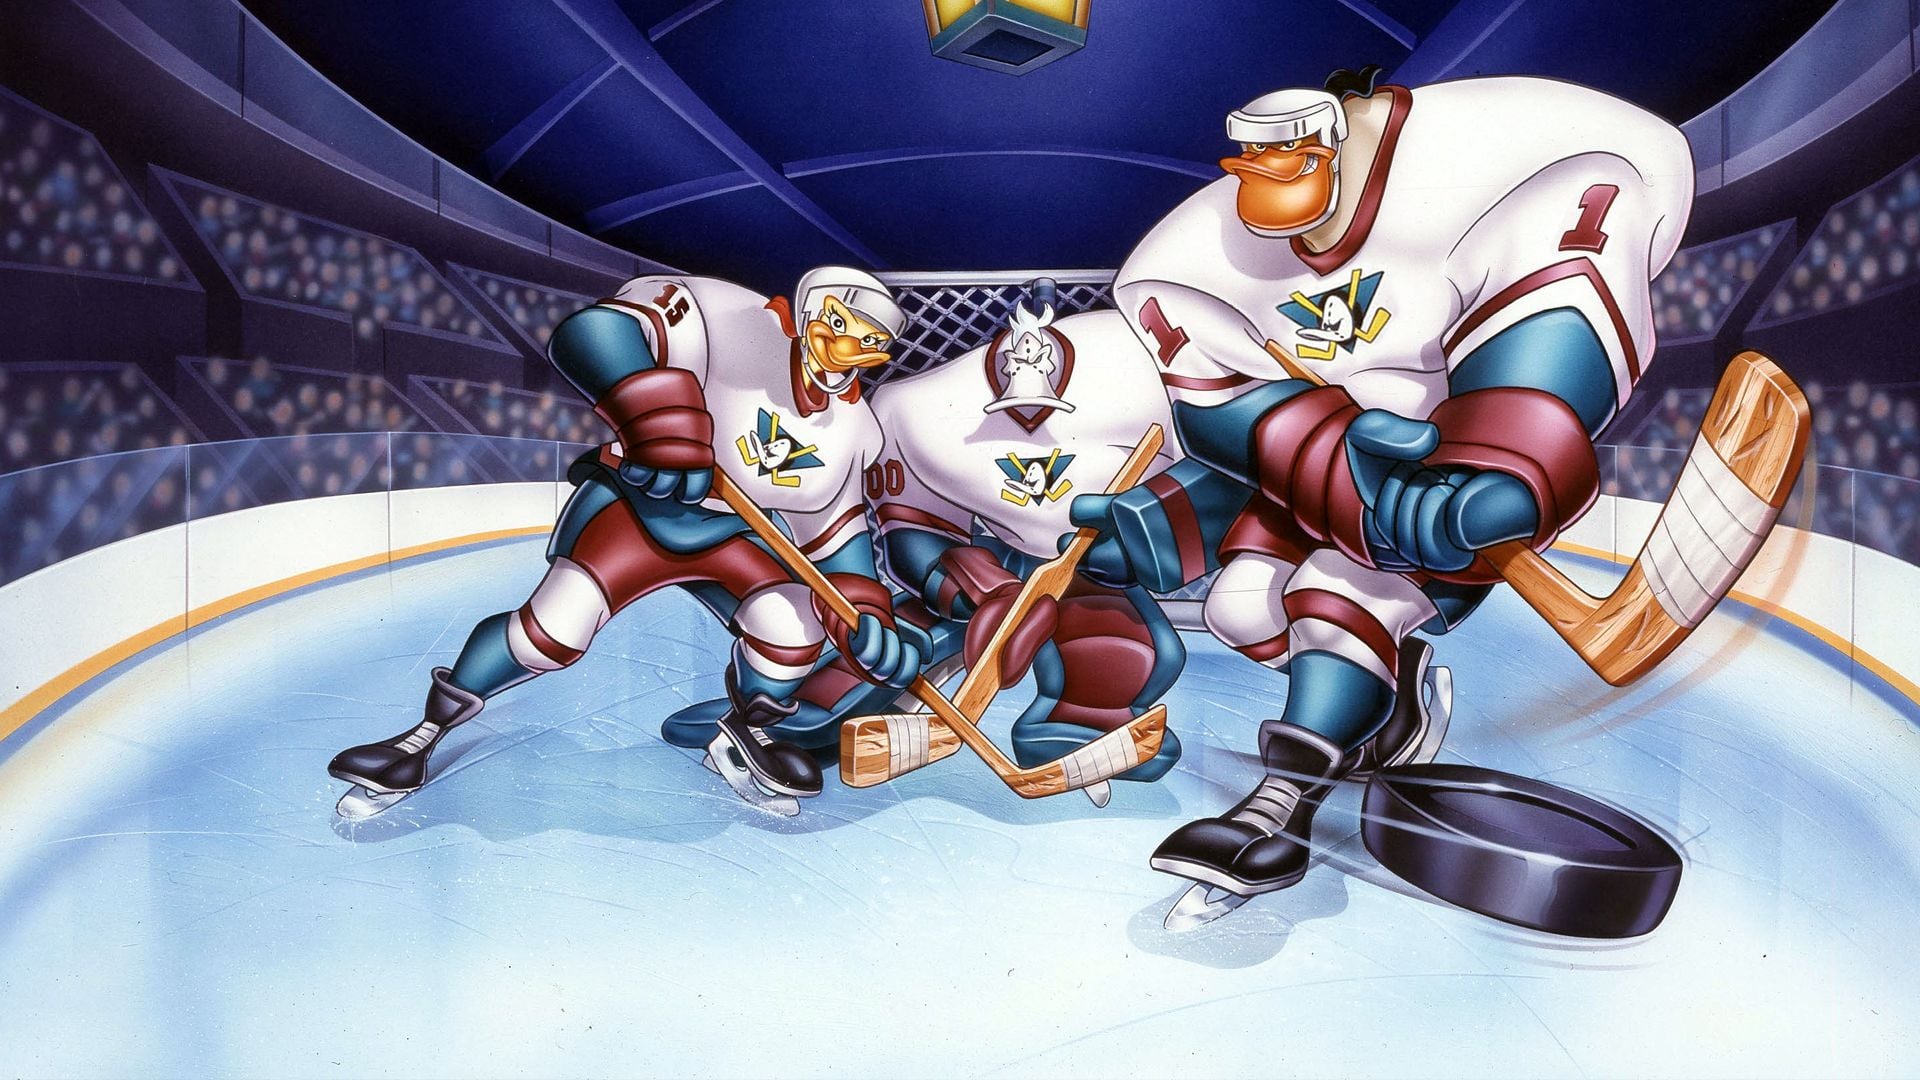 Top 164 + Mighty ducks the animated series - Lifewithvernonhoward.com